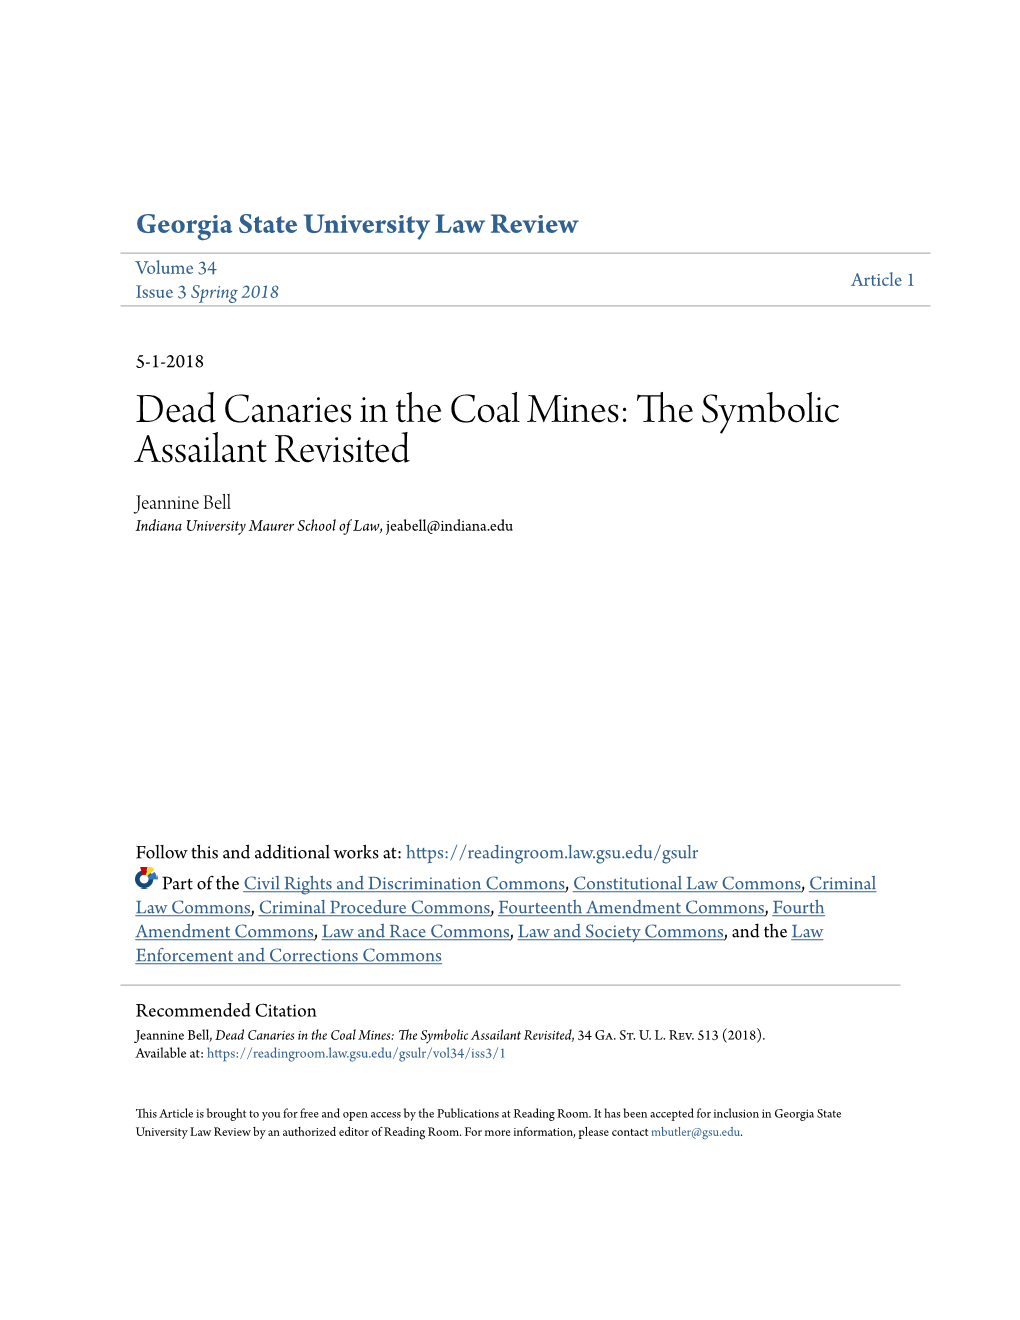 Dead Canaries in the Coal Mines: the Symbolic Assailant Revisited, 34 Ga